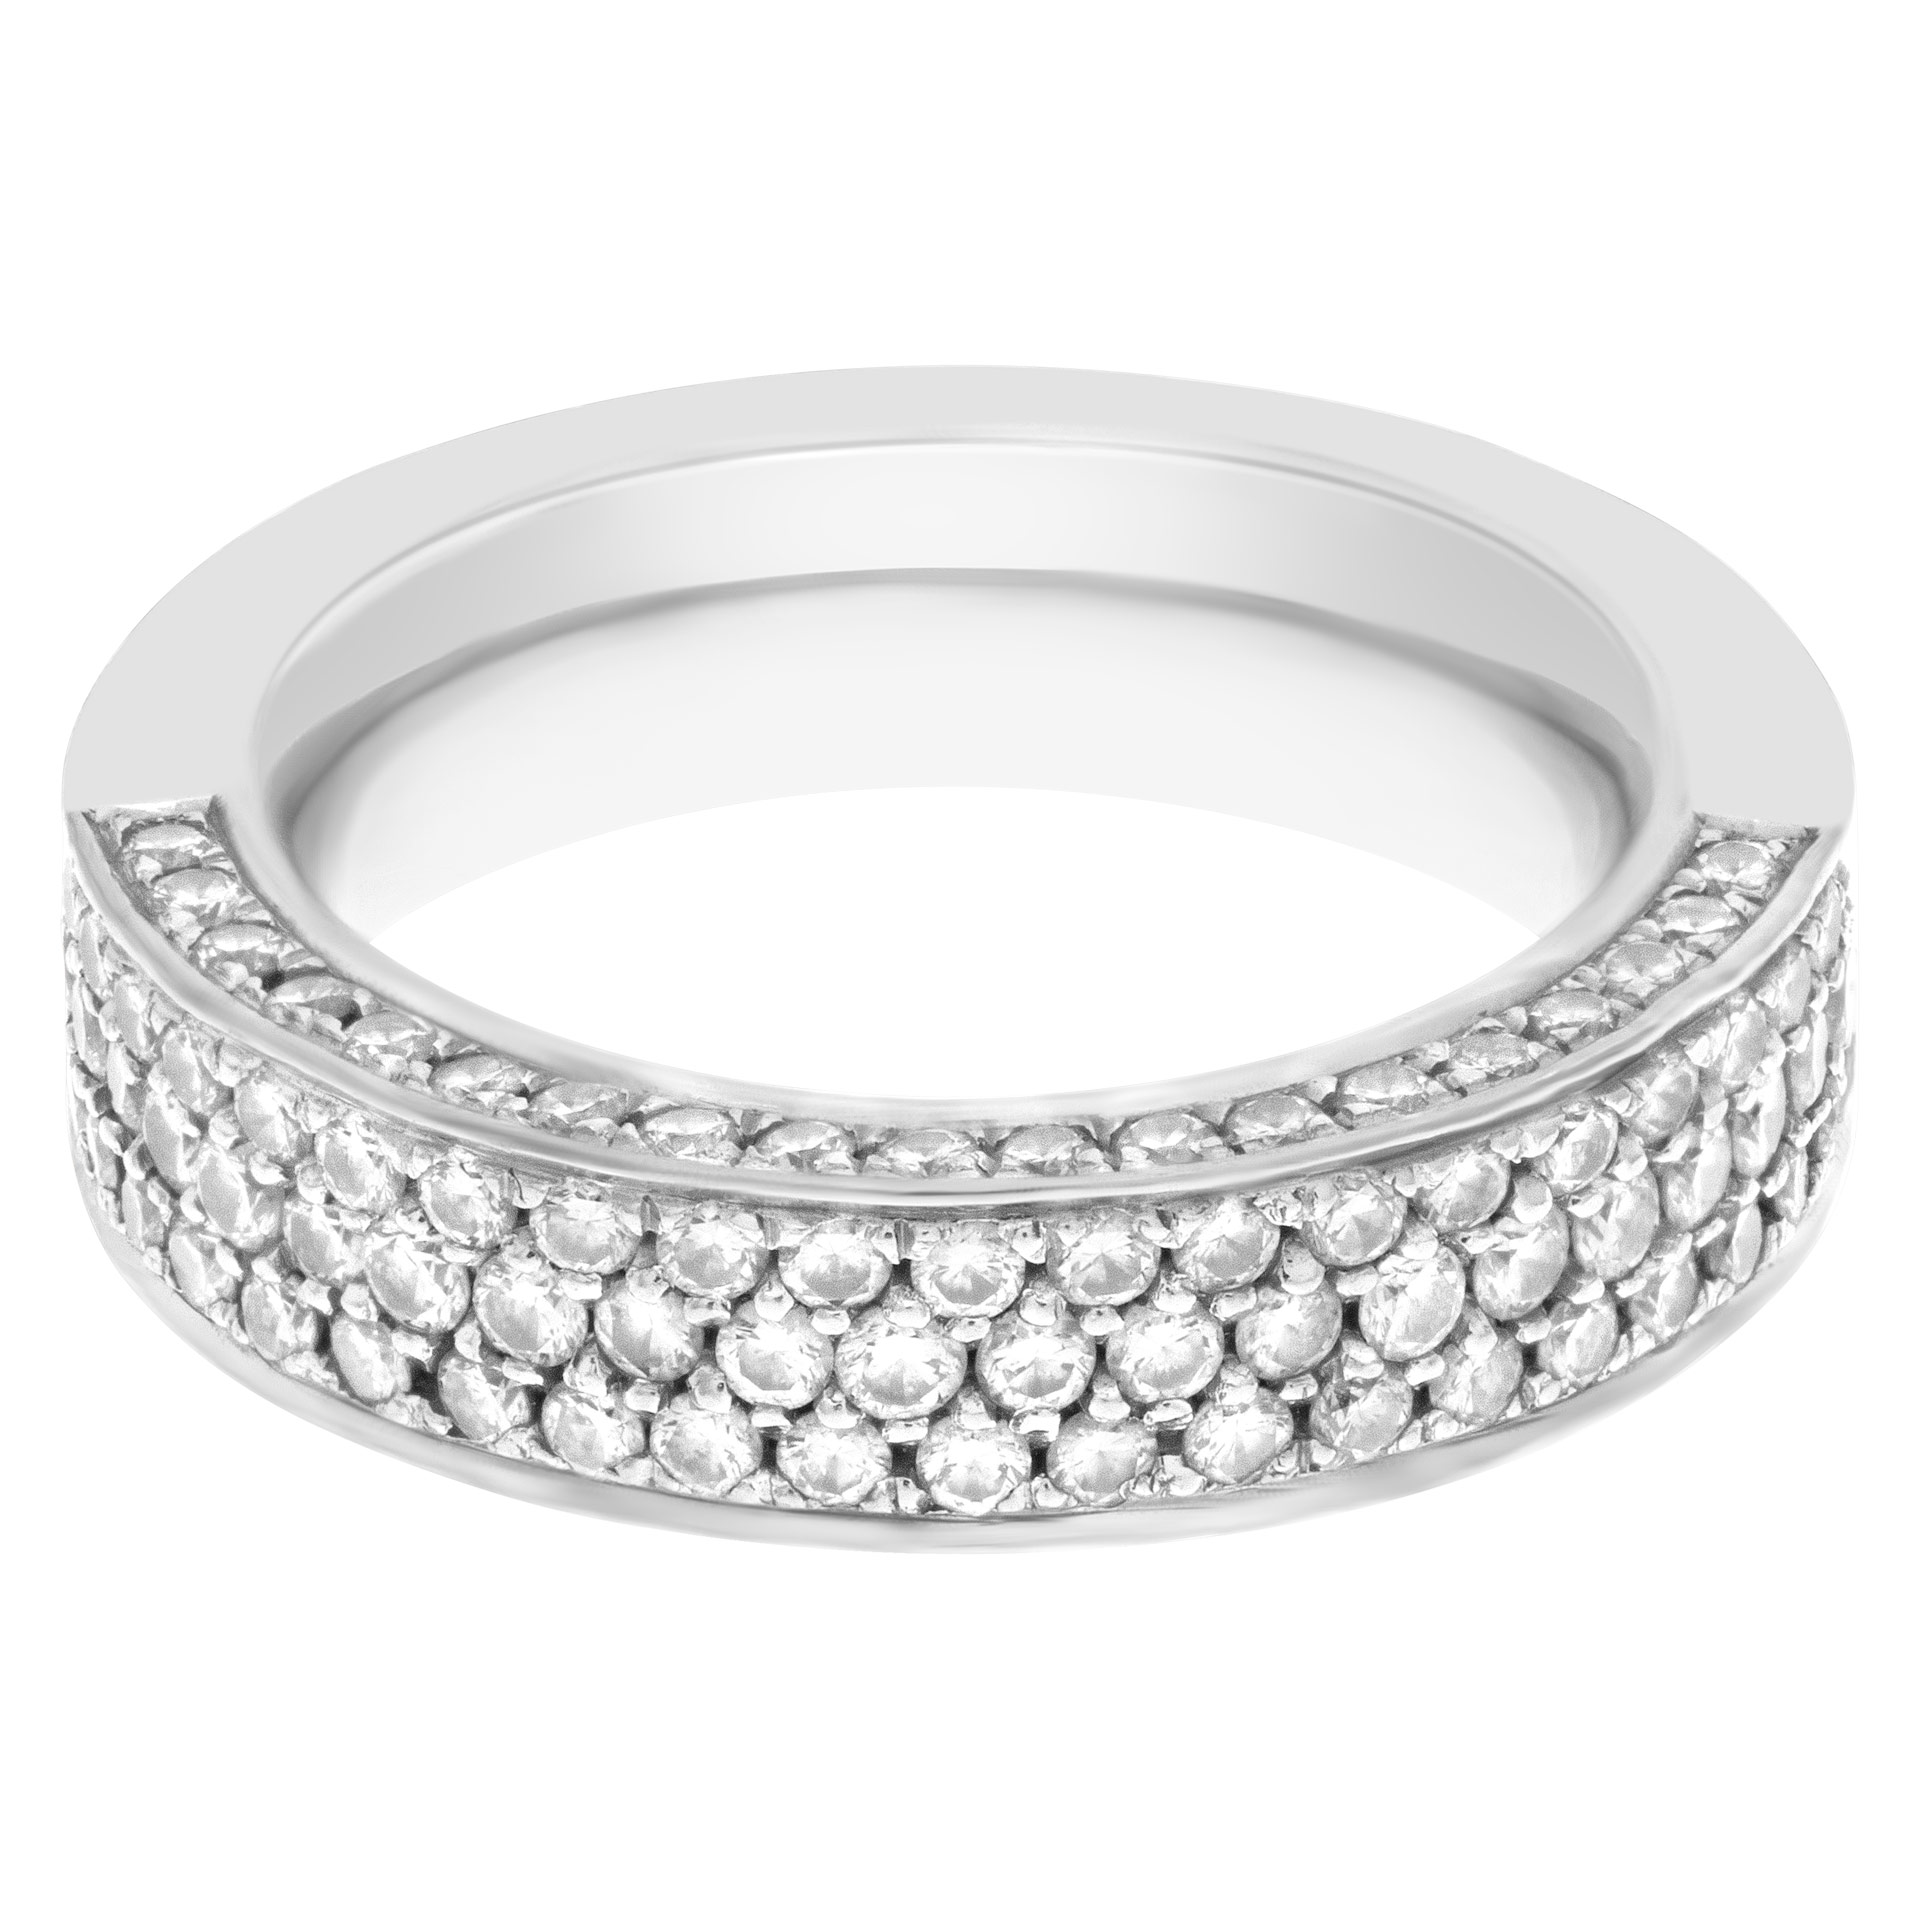 Wempe pave semi Diamond Eternity Band and Ring approx. 1.5 cts in diamonds